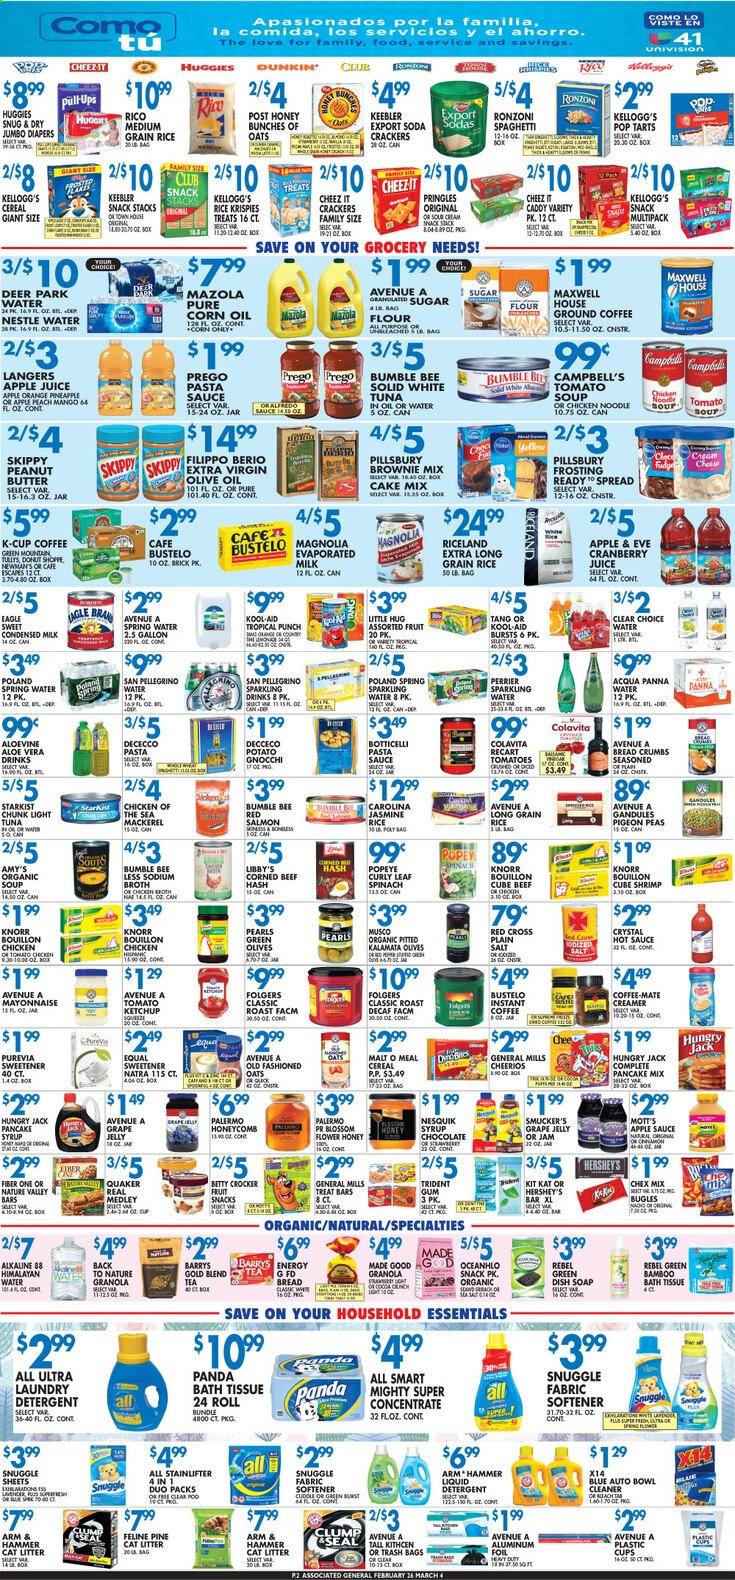 thumbnail - Associated Supermarkets Flyer - 02/26/2021 - 03/04/2021 - Sales products - brownie mix, cake mix, donut, pancakes, breadcrumbs, oranges, mackerel, salmon, tuna, shrimps, StarKist, beef hash, Campbell's, gnocchi, tomato soup, soup, Knorr, sauce, Pillsbury, Quaker, cheese, jelly, Coffee-Mate, evaporated milk, condensed milk, Blossom, sour cream, creamer, mayonnaise, Hershey's, corn, spinach, peas, fudge, Nestlé, chocolate, KitKat, crackers, Kellogg's, Nesquik, Trident, Pop-Tarts, fruit snack, Keebler, Pringles, Chex Mix, ARM & HAMMER, bouillon, flour, frosting, granulated sugar, sugar, oats, salt, broth, malt, olives, light tuna, Chicken of the Sea, cereals, granola, Cheerios, Rice Krispies, Nature Valley, Fiber One, spaghetti, toor dal, whole grain rice, noodles, long grain rice, hot sauce, ketchup, pasta sauce, corn oil, extra virgin olive oil, olive oil, apple sauce, grape jelly, fruit jam, peanut butter, syrup, apple juice, cranberry juice, soda, juice, Mott's, Perrier, spring water, sparkling water, Maxwell House, tea, instant coffee, Folgers, ground coffee, coffee capsules, K-Cups, Green Mountain, punch, beef meat, corned beef, Huggies, bath tissue, detergent, cleaner, Snuggle, fabric softener, laundry detergent, soap, trash bags, cat litter, bowl, pineapple. Page 2.